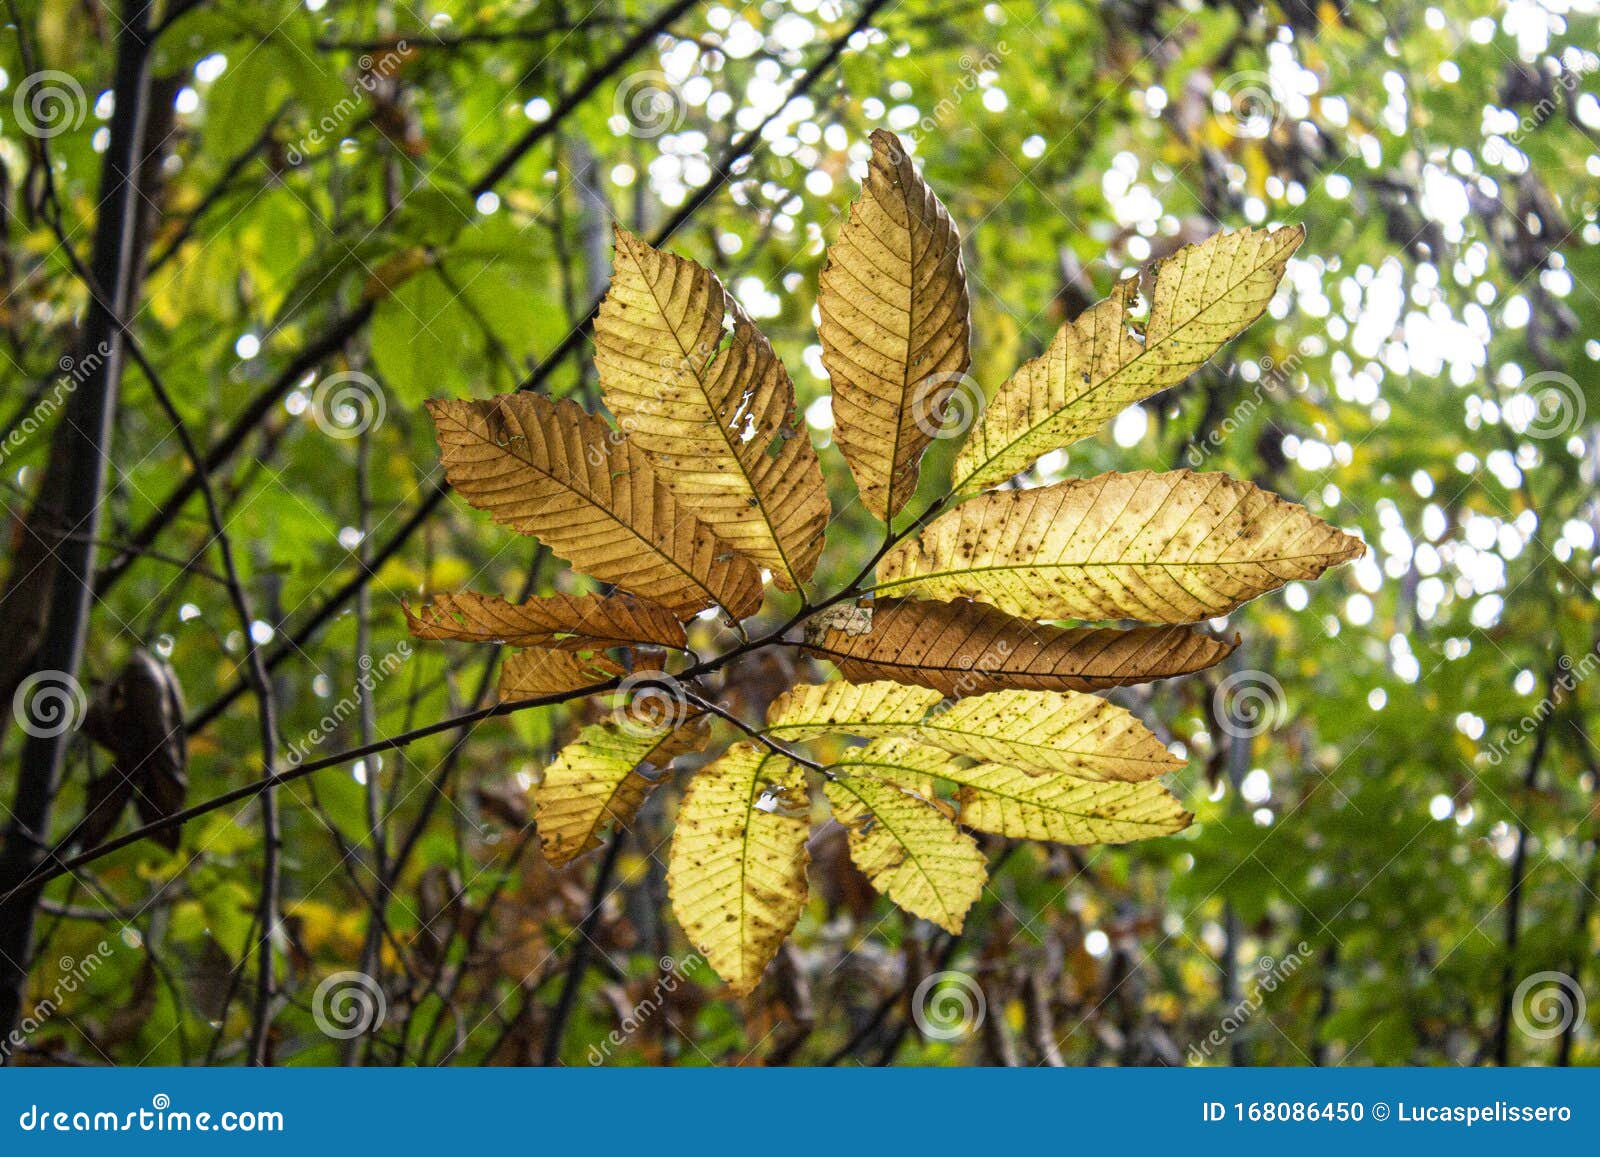 fan of dry leaves on the tip of a branch